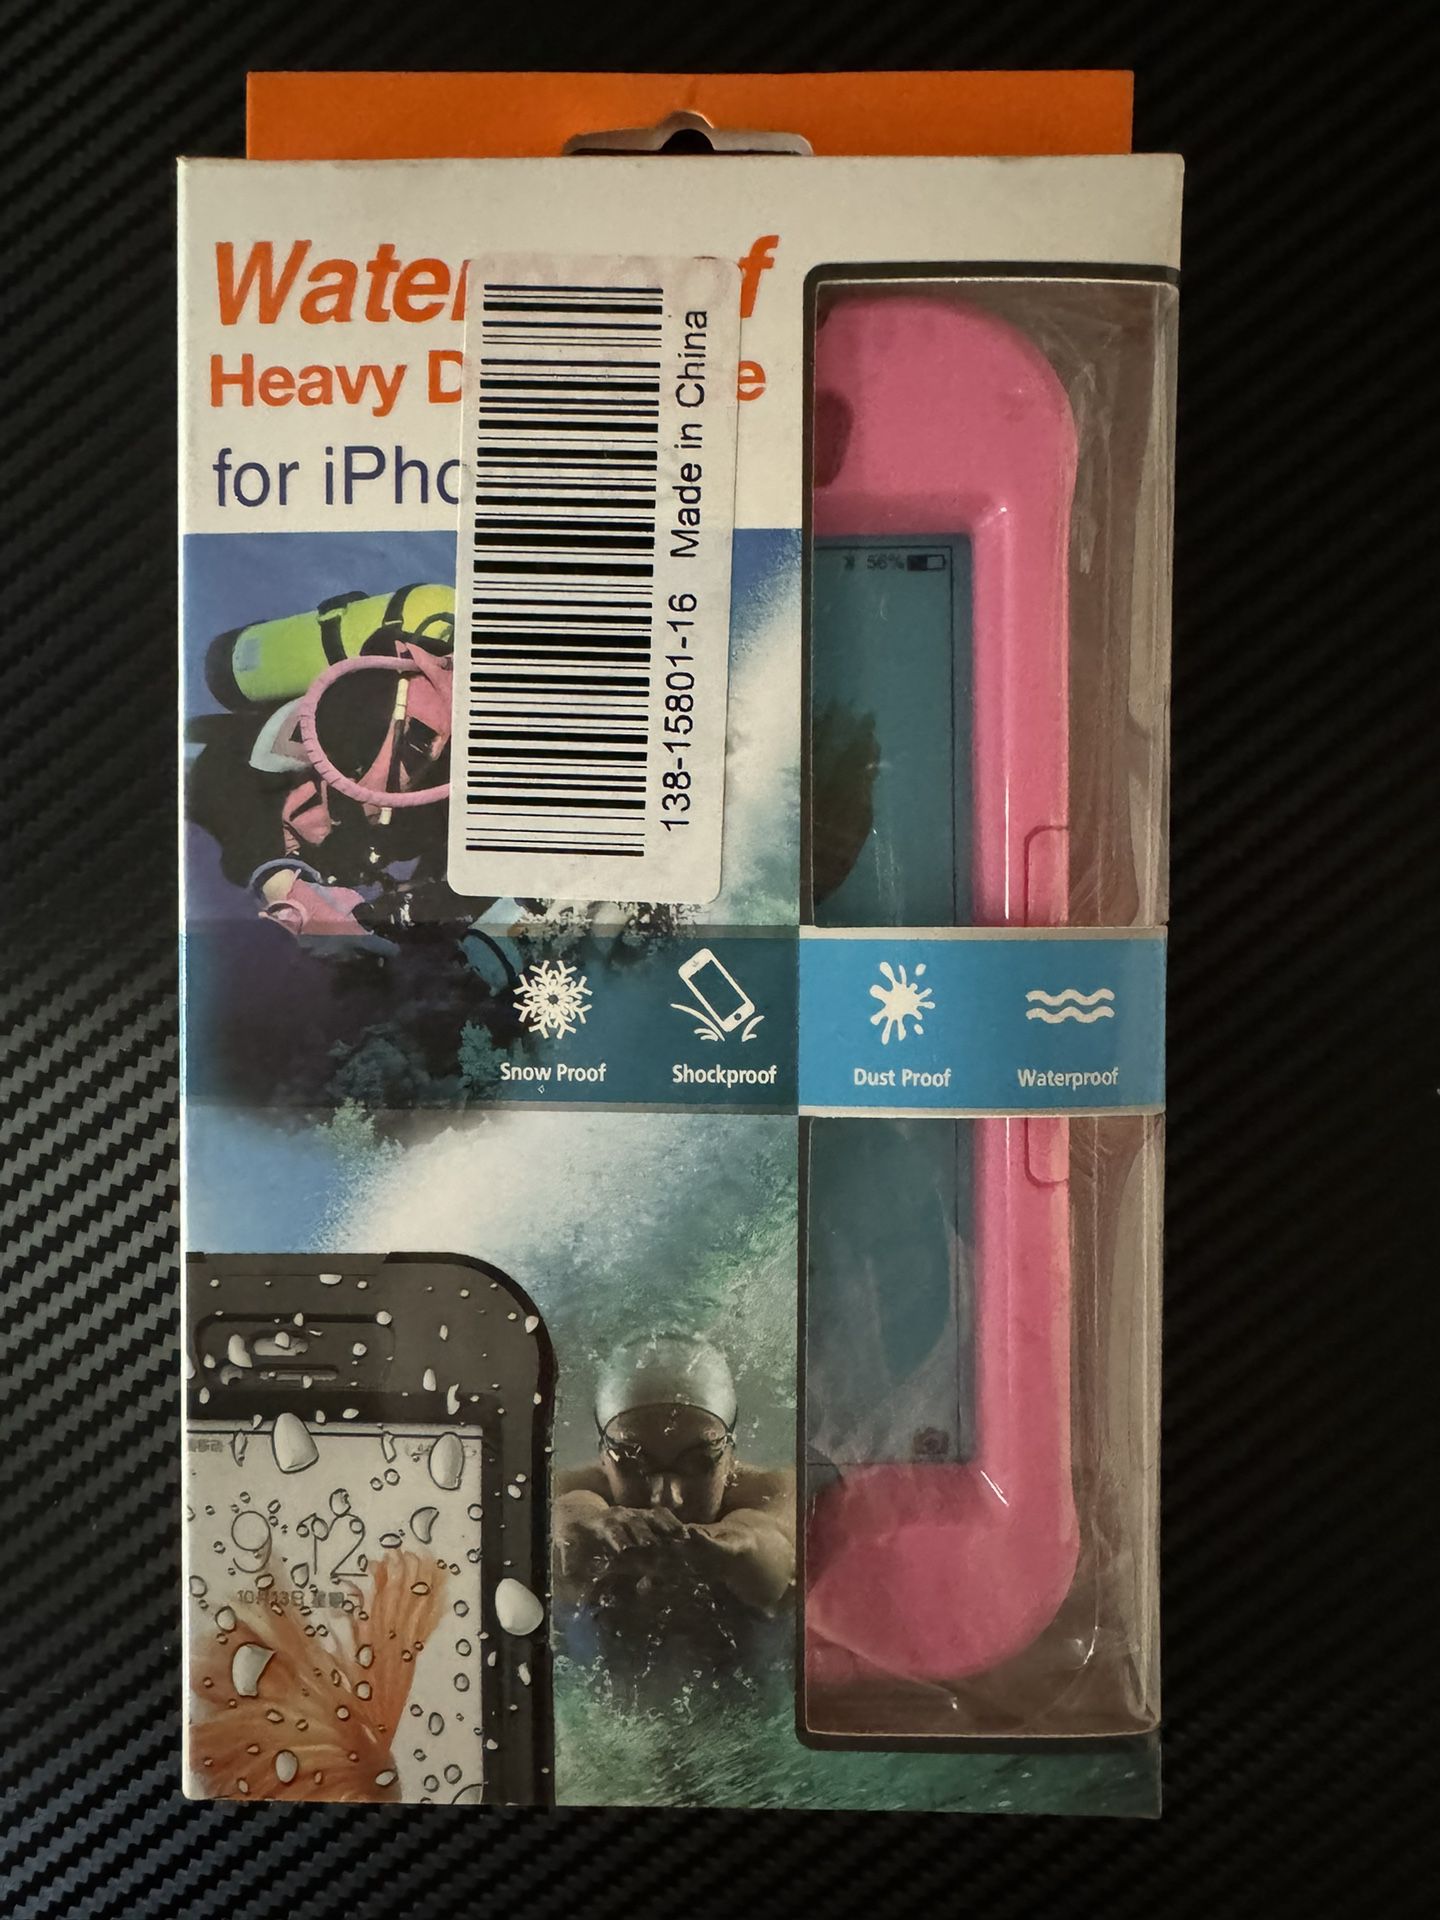 Brand New Waterproof Heavy Duty Case iPhone 6S Pink $8 !!!ACCEPTING OFFERS!!!